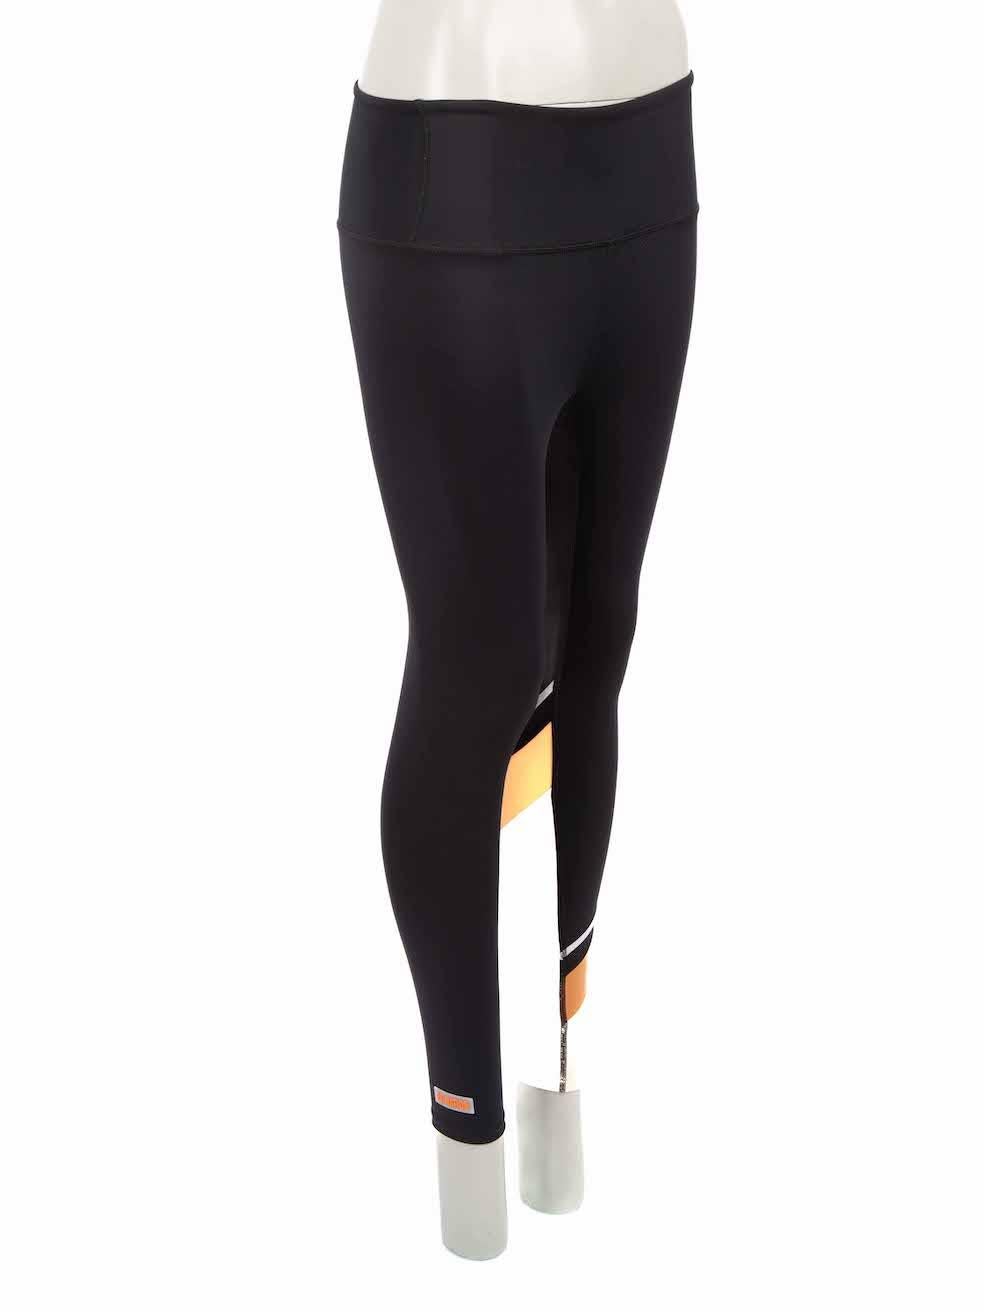 CONDITION is Very good. Hardly any visible wear to leggings is evident on this used P.E Nation designer resale item.
 
Details
Black
Synthetic
Sport leggings
Figure hugging fit
Stretchy
Beige and brown striped cuff detail
 
Made in China
